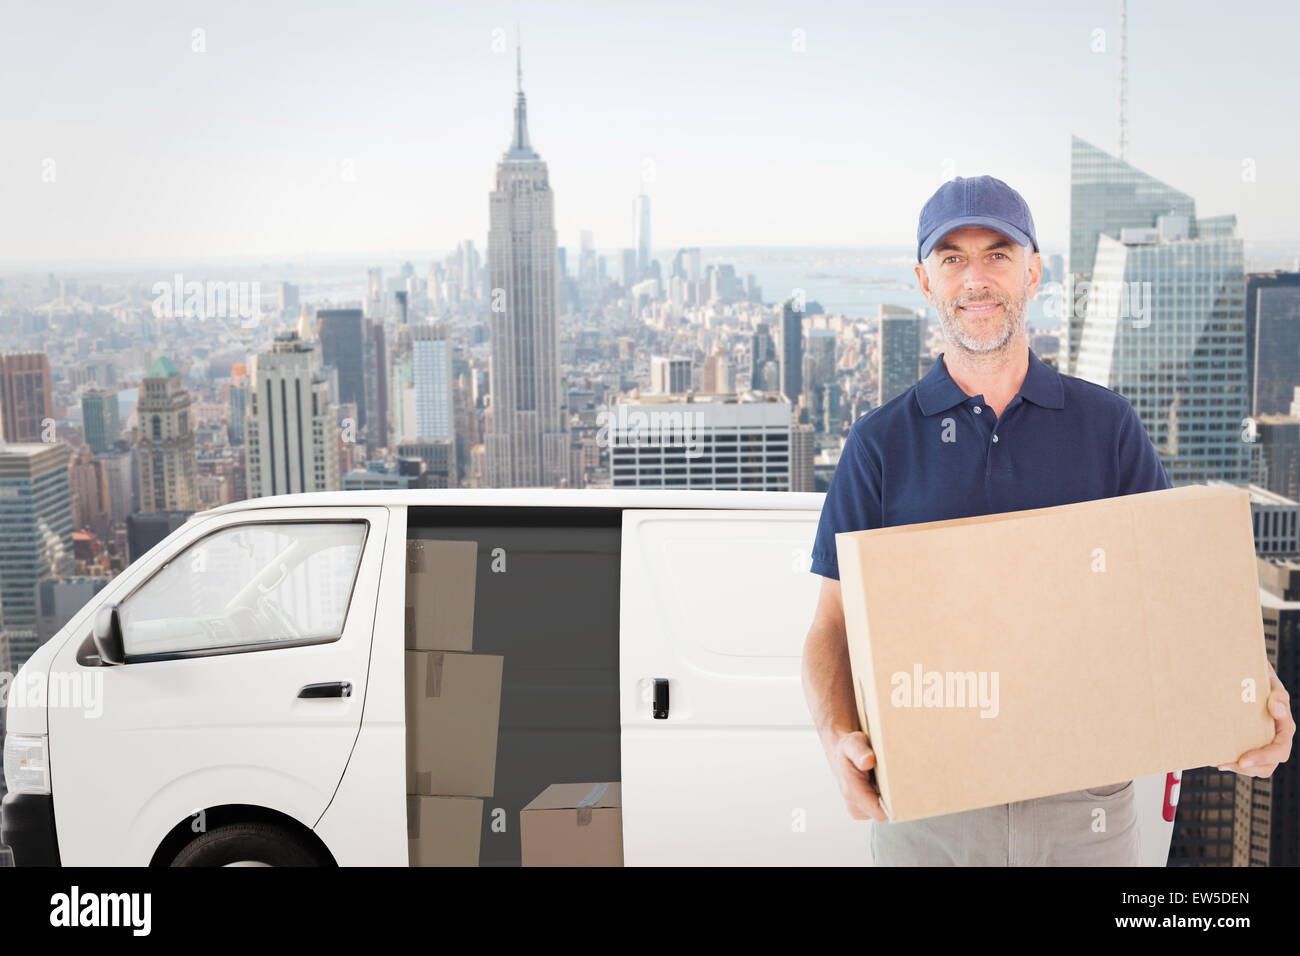 Composite image of delivery man holding cardboard box Banque D'Images